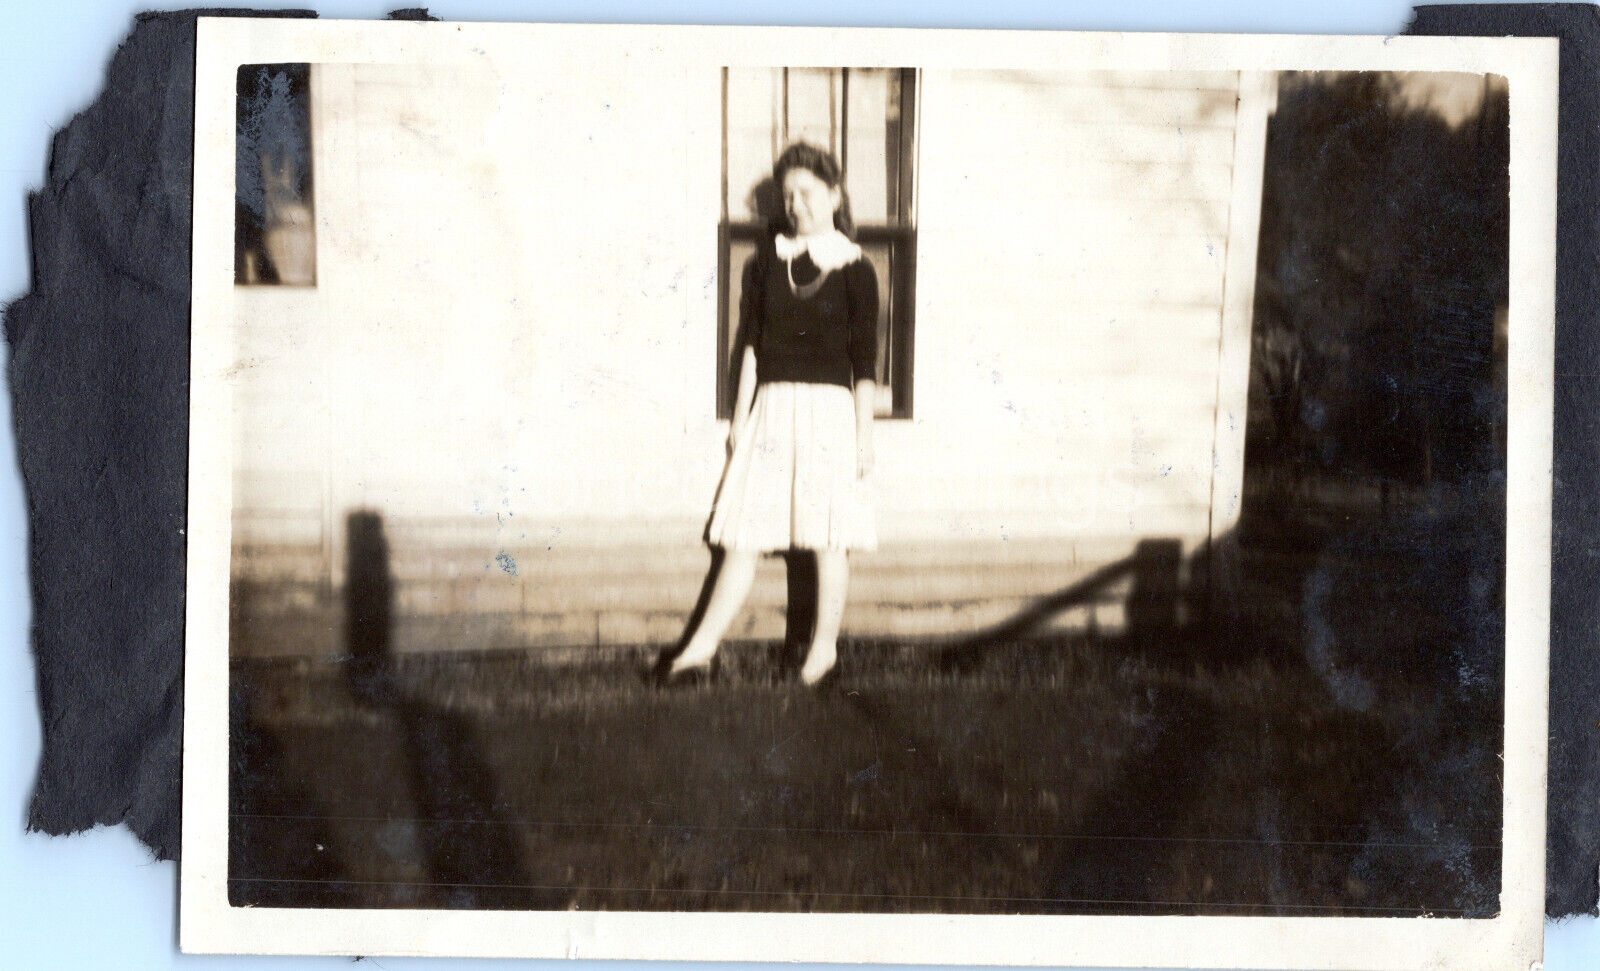 VTG B&W Found Photo - 1930s - Blurry Picture Of Young Woman Posing Beside House